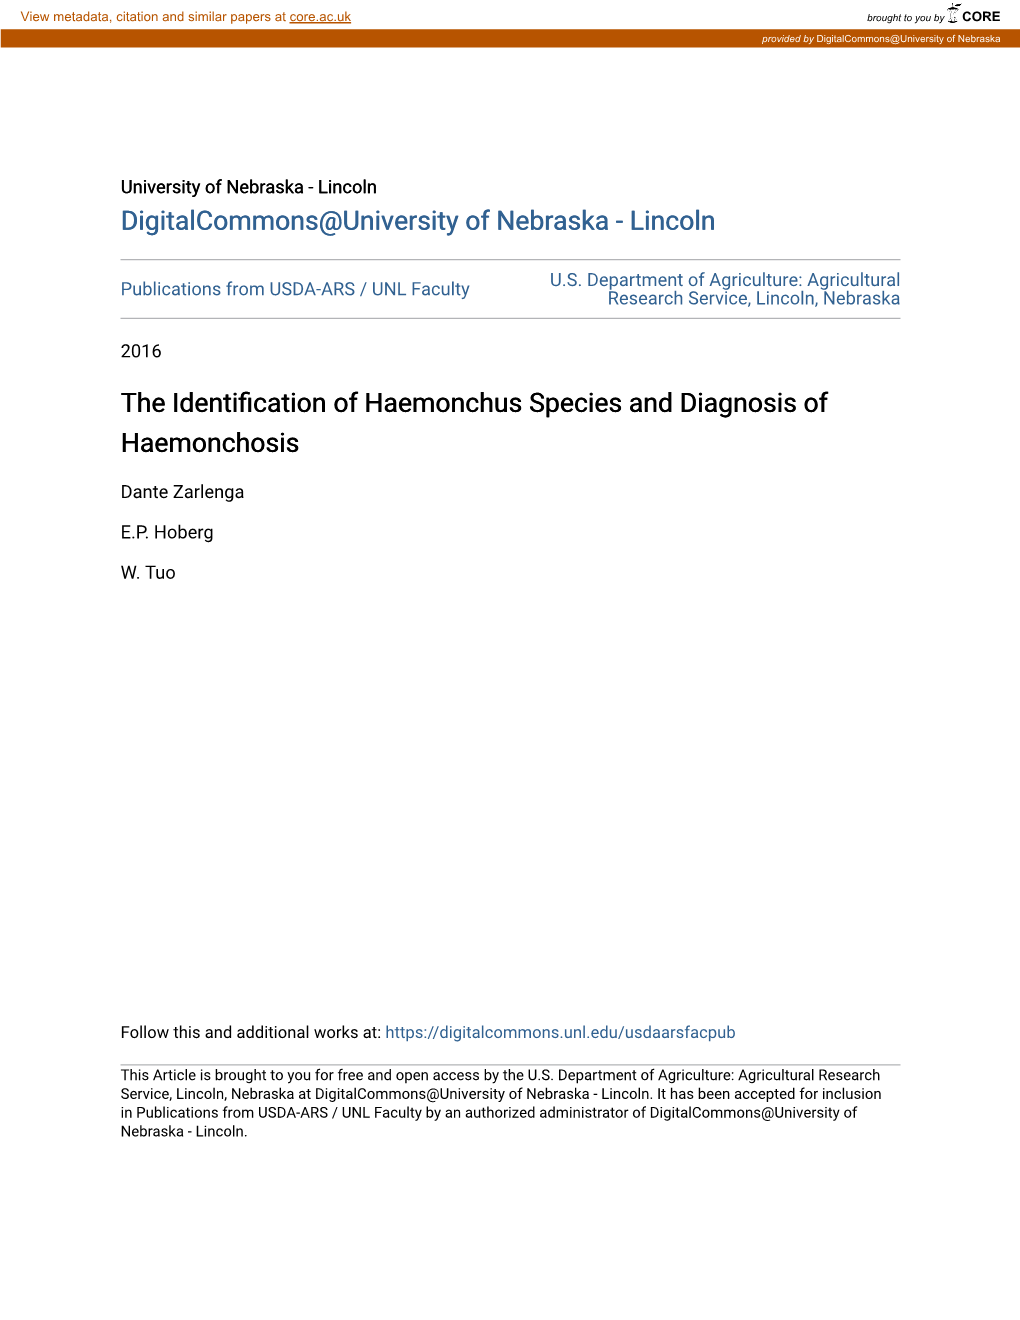 The Identification of Haemonchus Species and Diagnosis of Haemonchosis